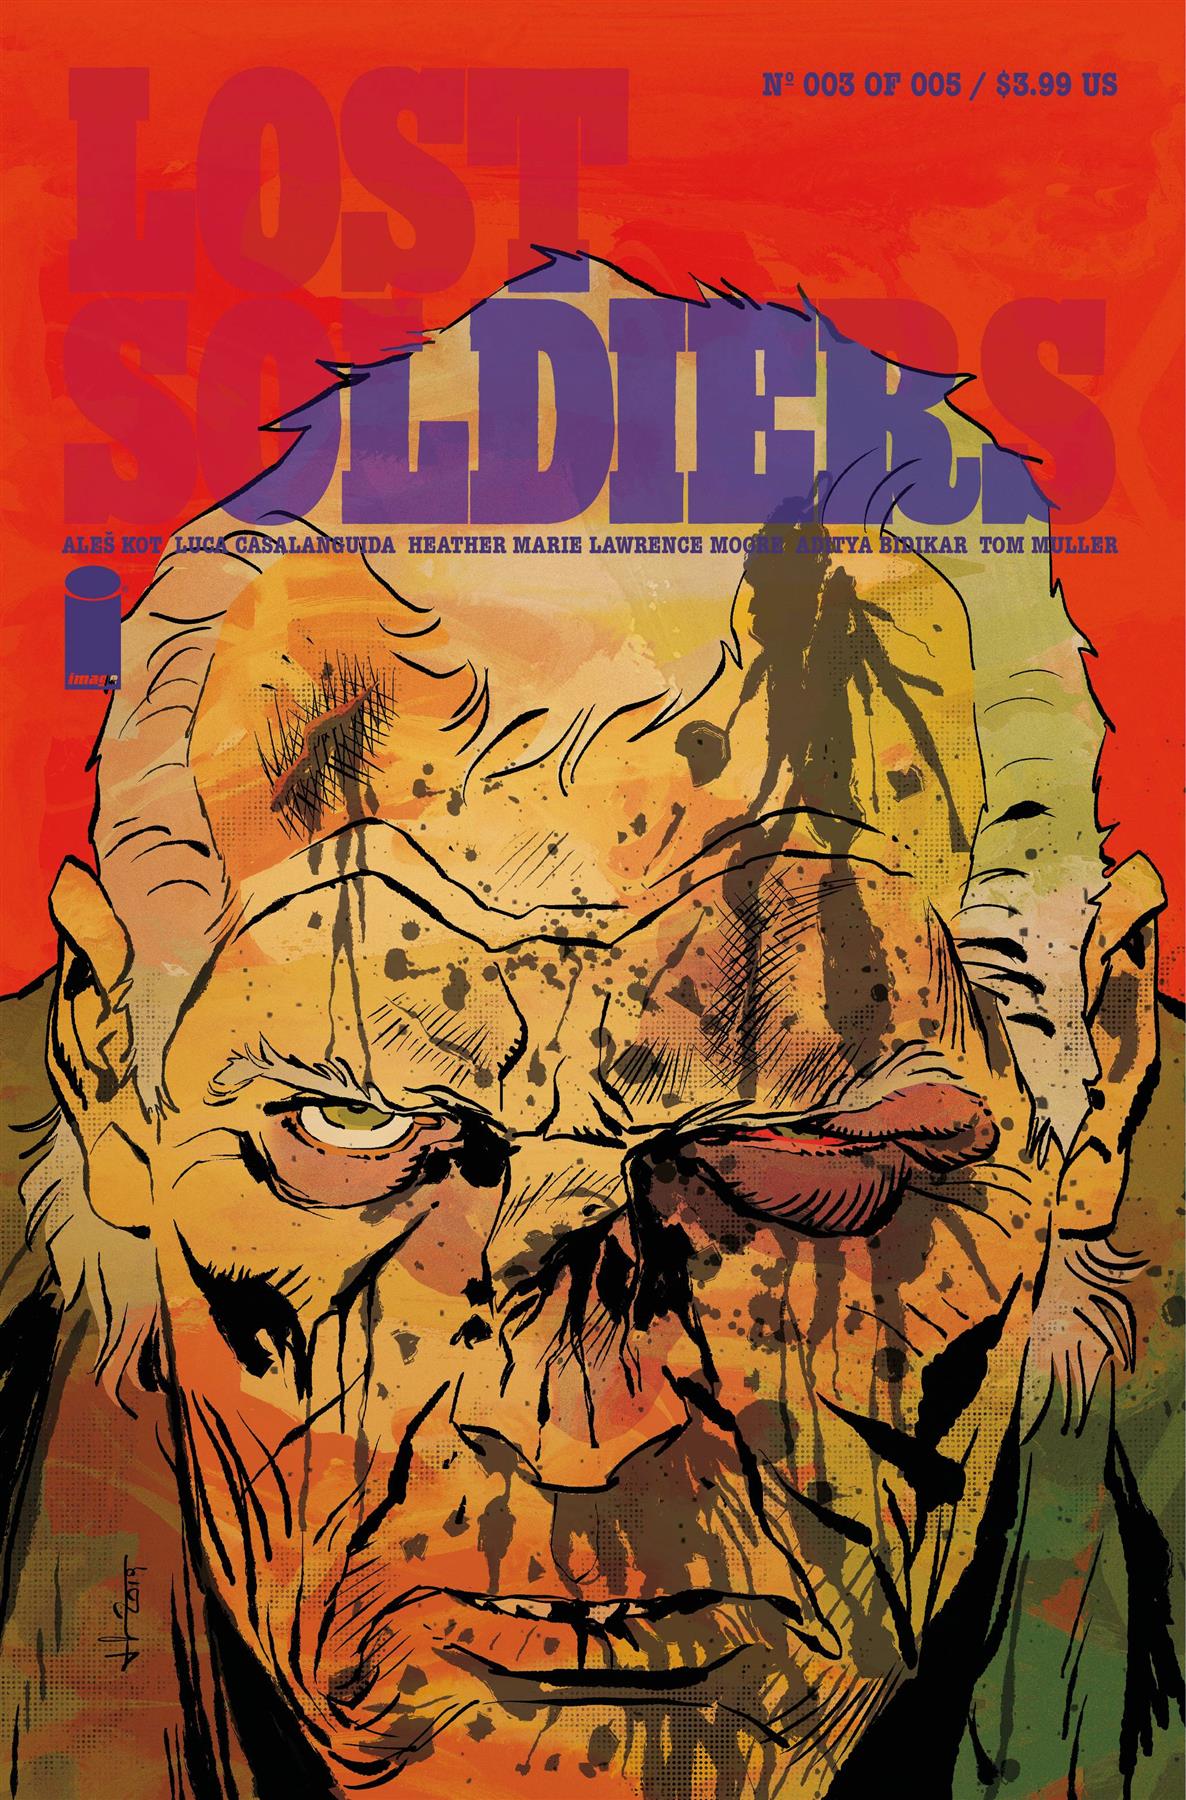 Lost Soldiers #4 () Image Comics Comic Book 2020